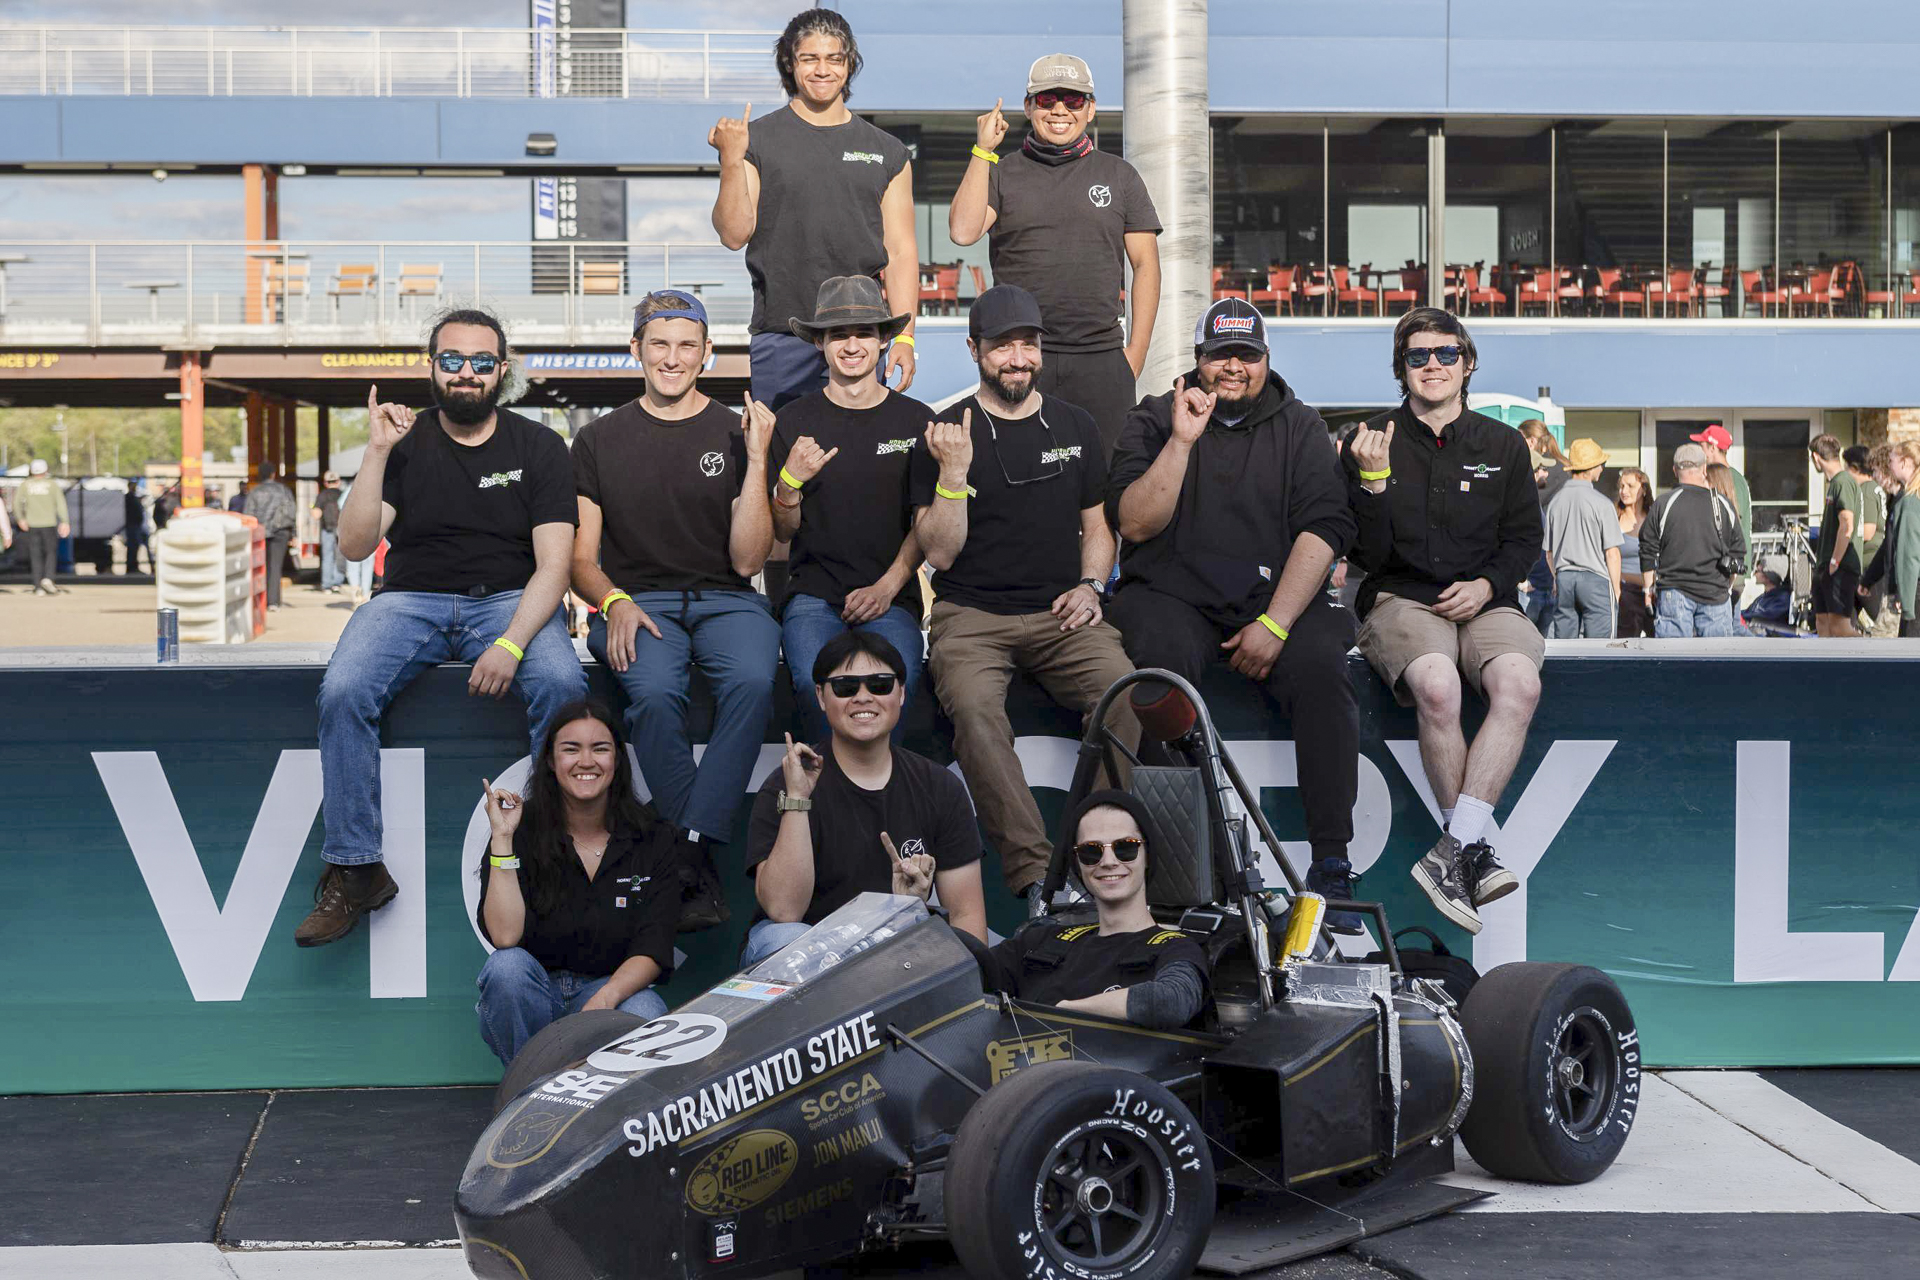 Members of the Sacramento State Hornet Racing team posing for a photo with their race car.